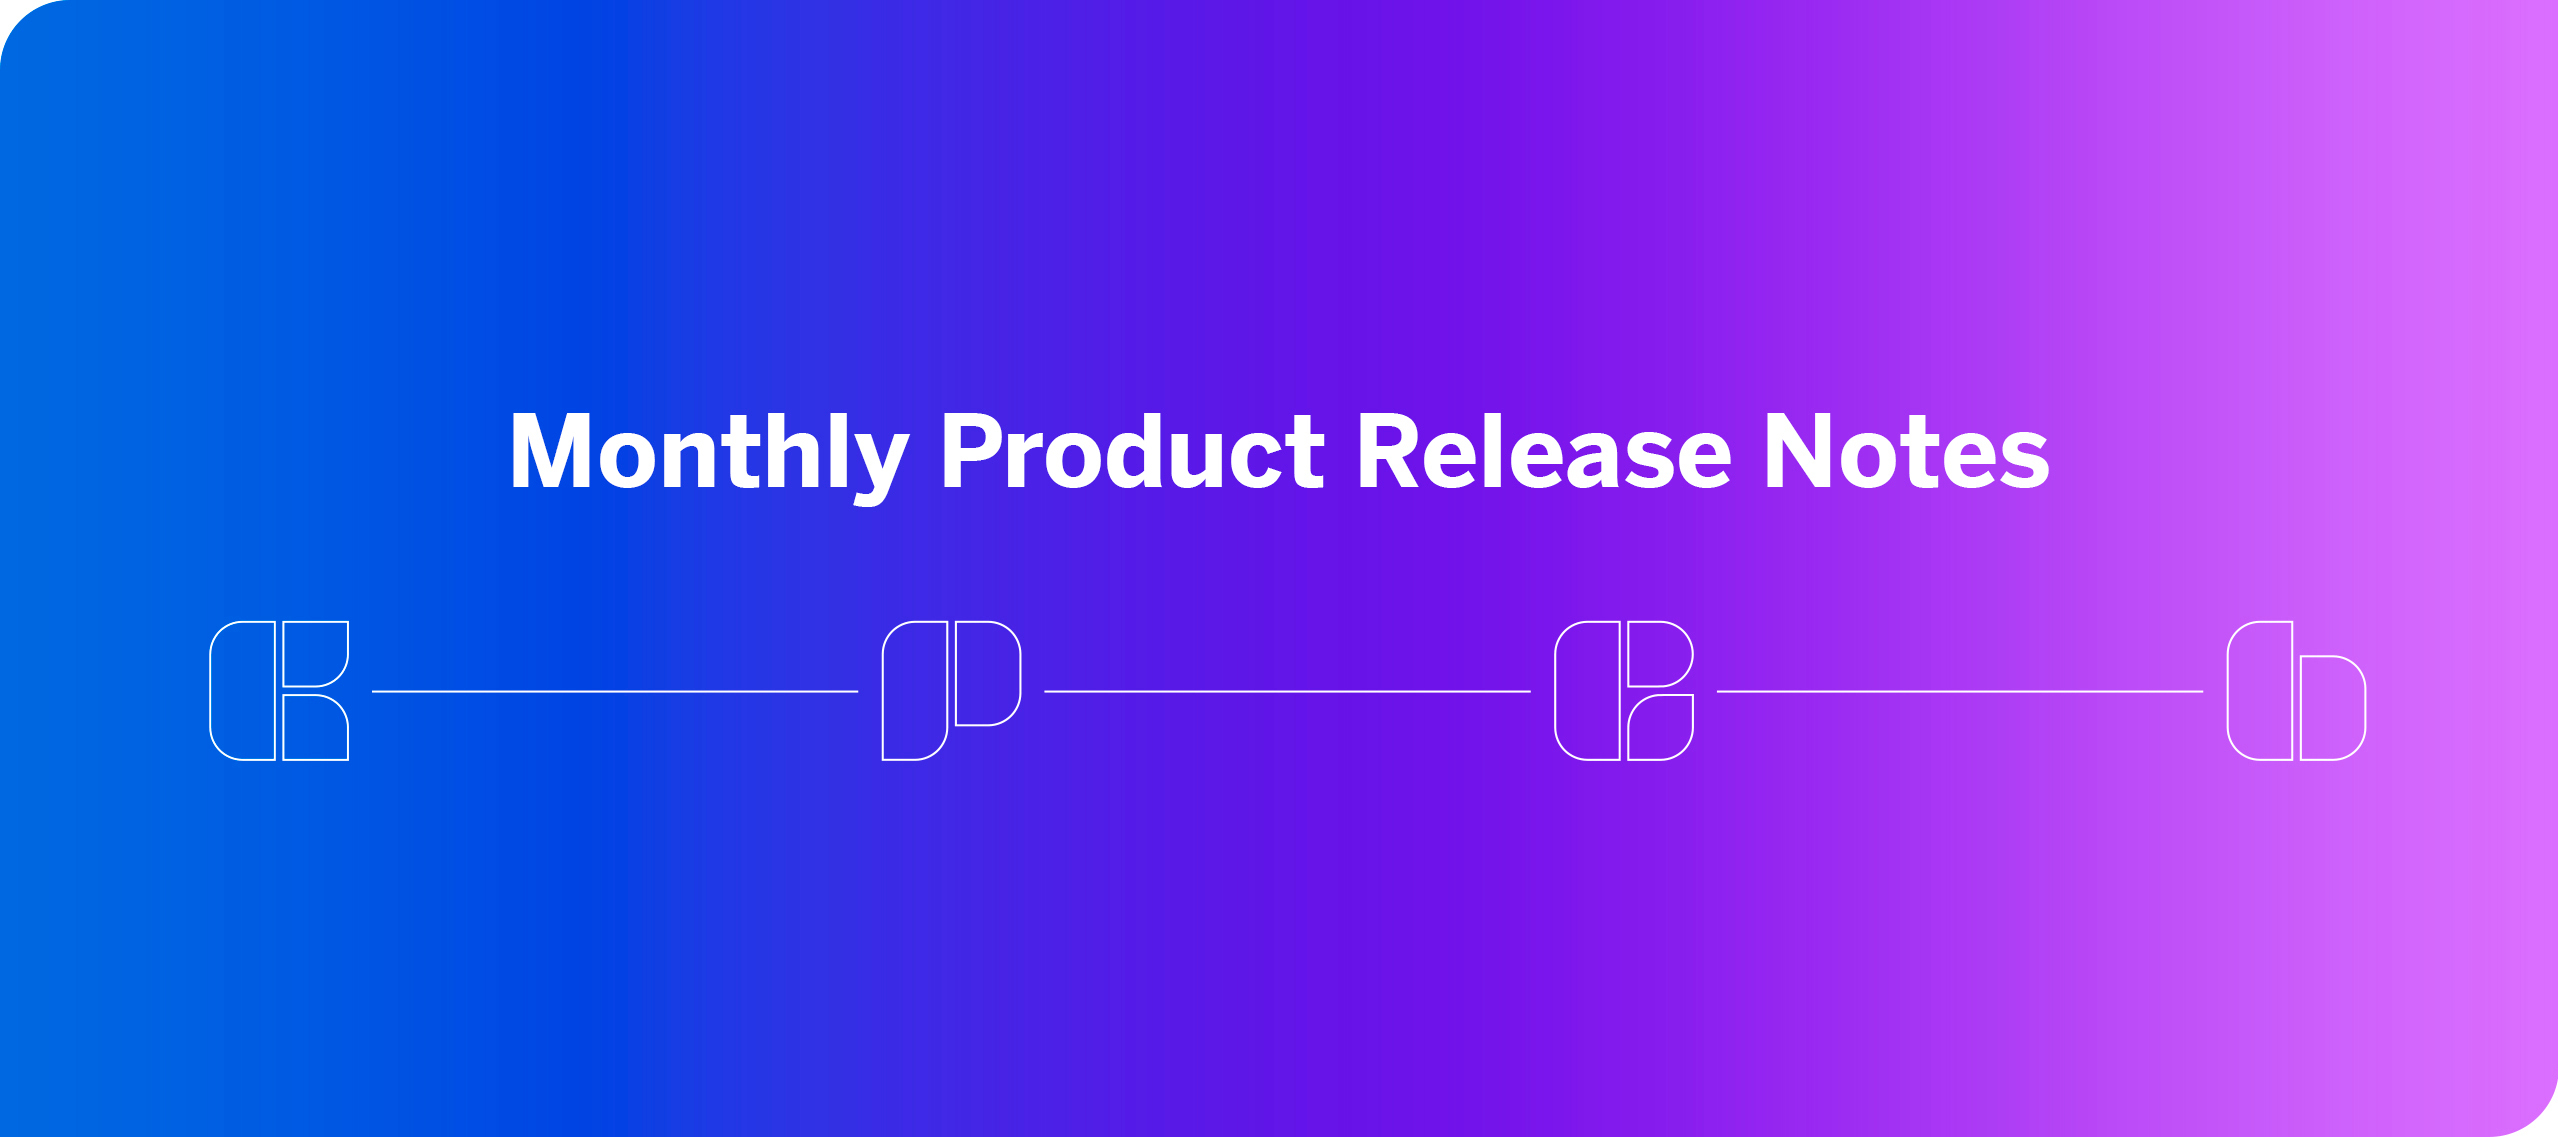 Monthly Product Release Notes - April 6, 2023 to May 3, 2023